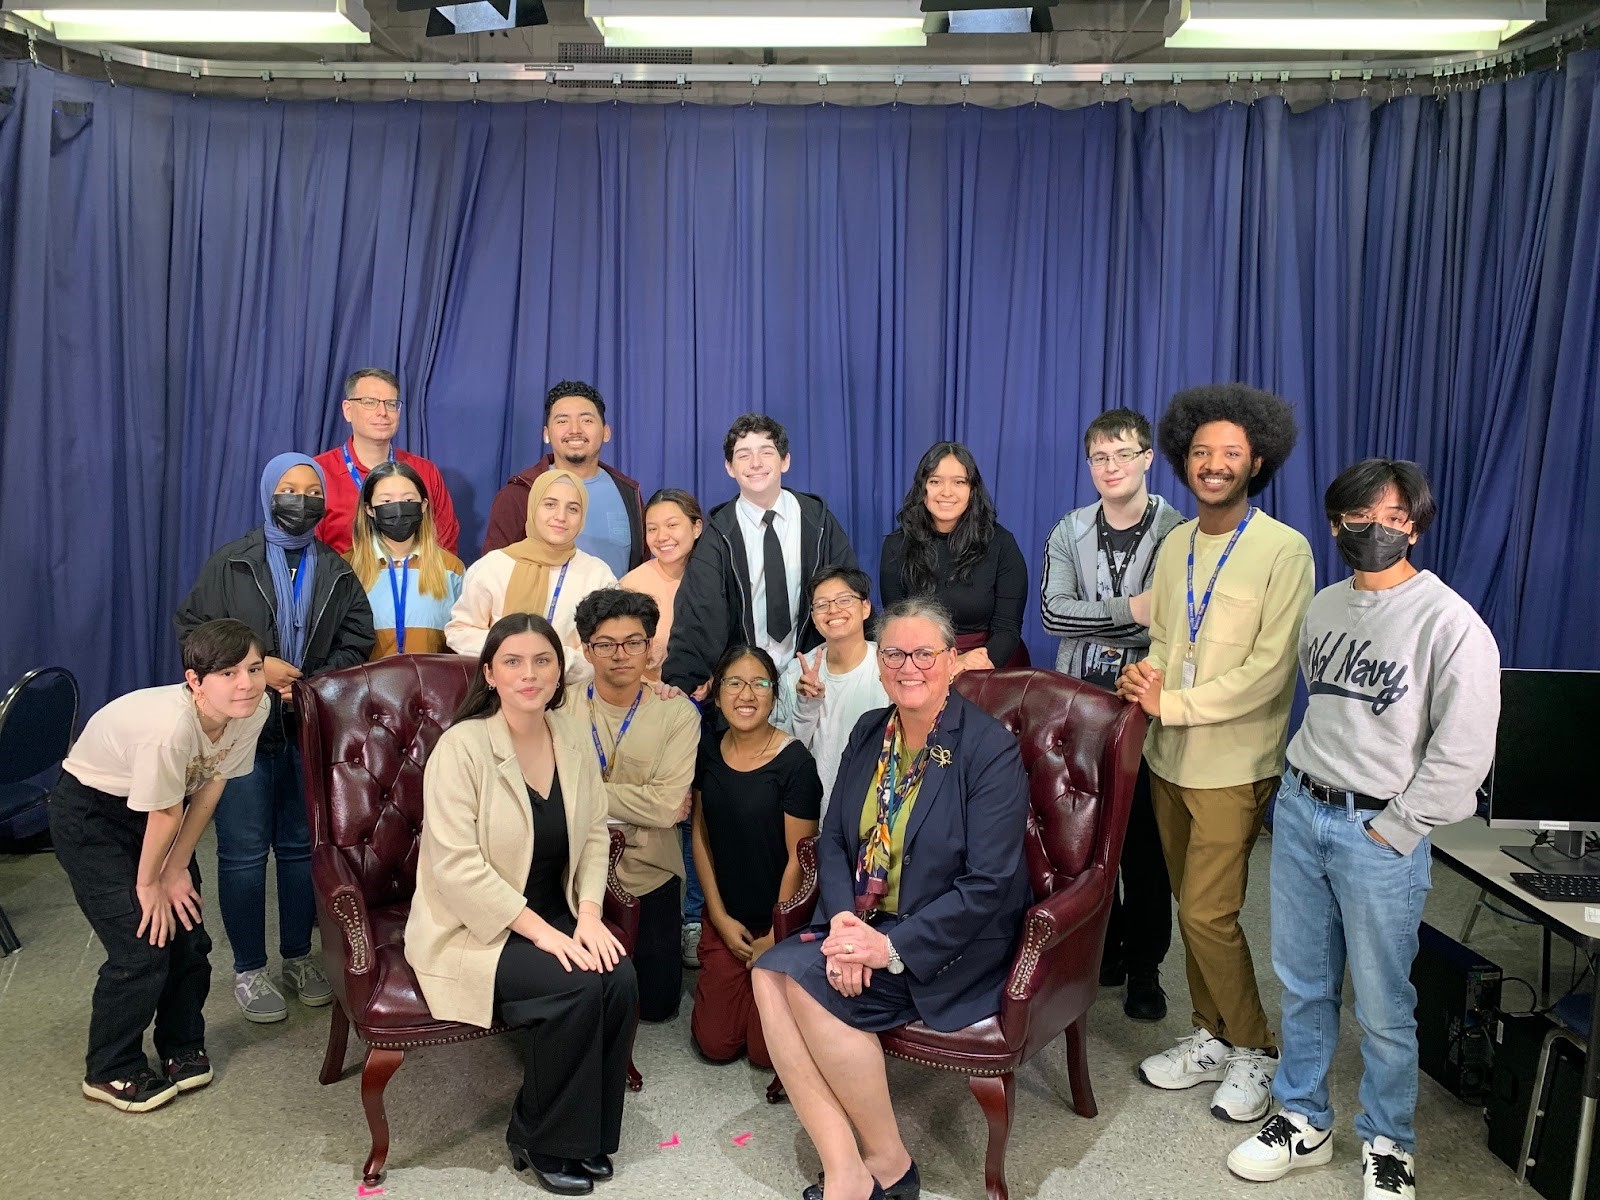 Dr. Reid visited John R. Lewis High School to be interviewed by the school’s multimedia club